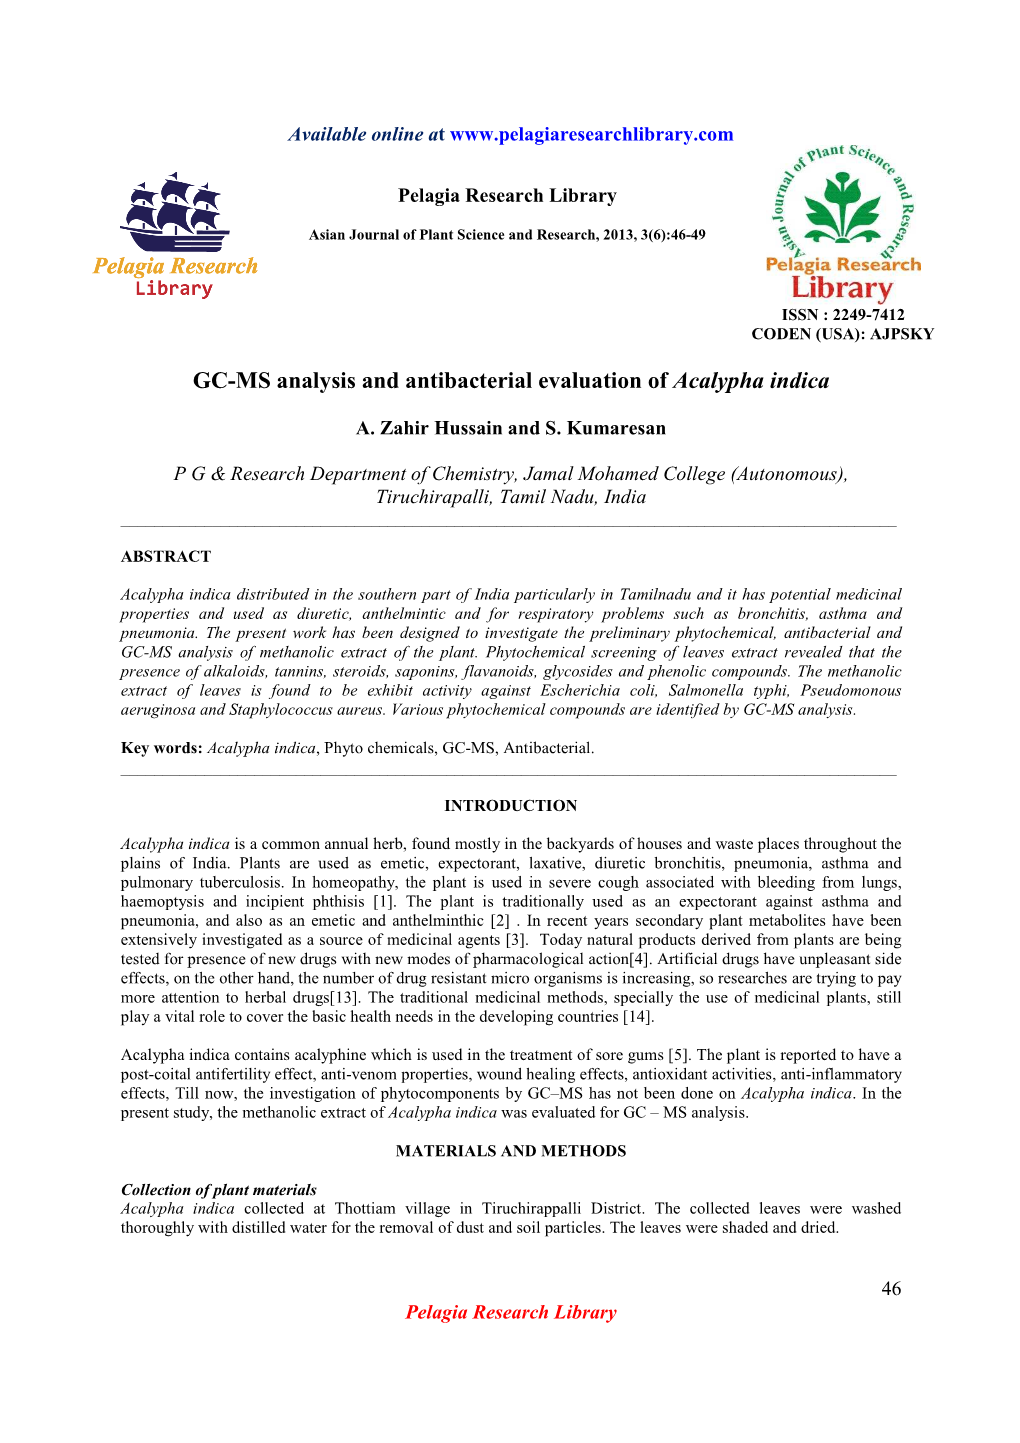 GC-MS Analysis and Antibacterial Evaluation of Acalypha Indica